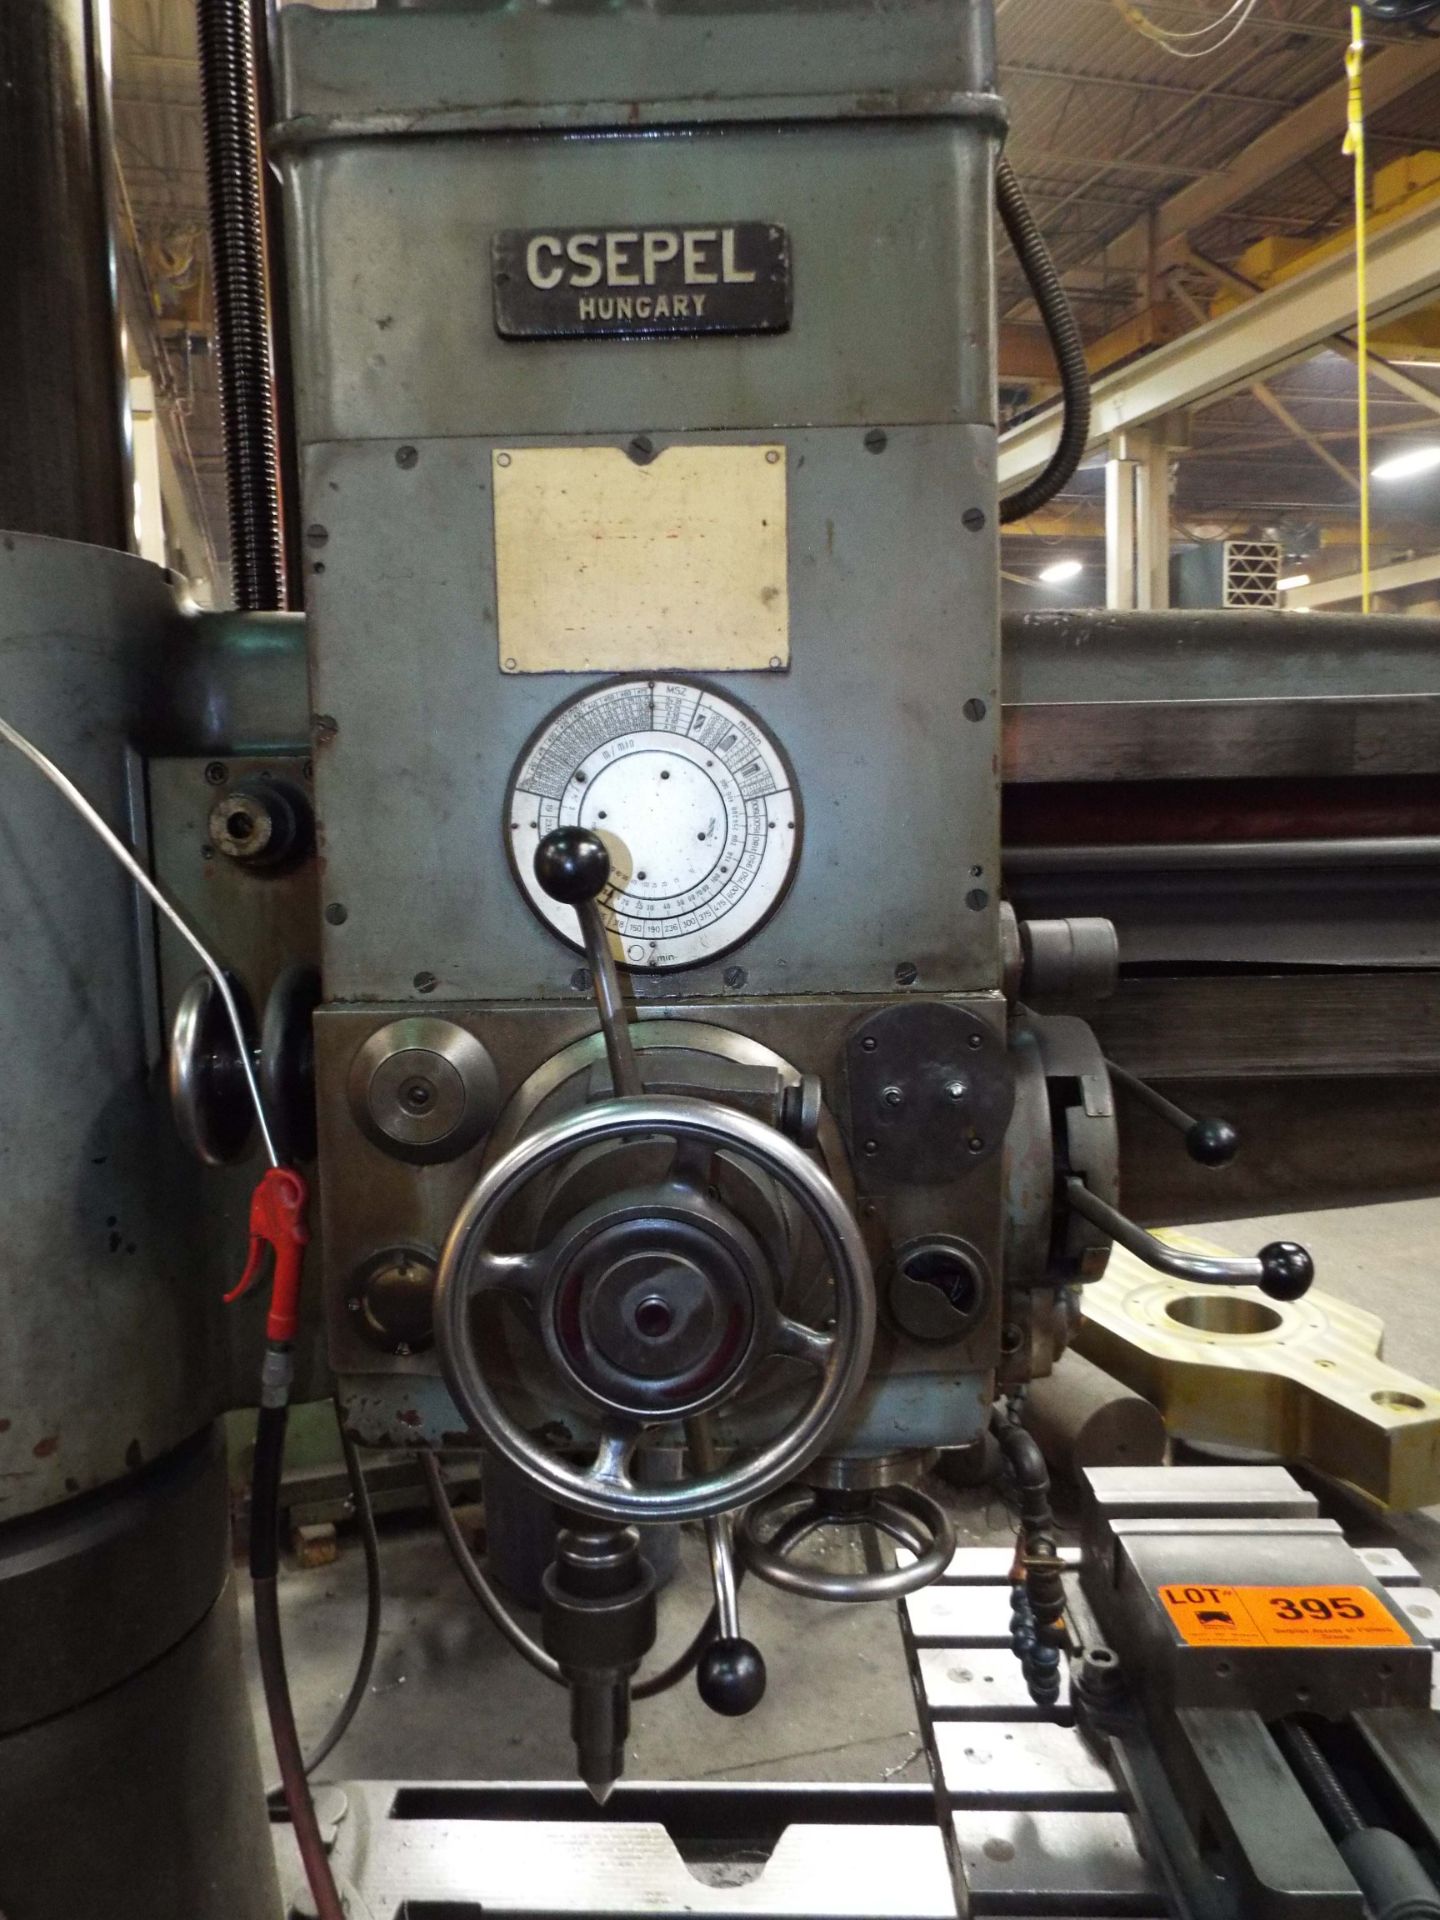 CSEPEL RFH75/1750 5' RADIAL ARM DRILL WITH SPEEDS TO 1900 RPM, S/N: 72087 (CI) (LOCATED AT 215 - Image 5 of 5